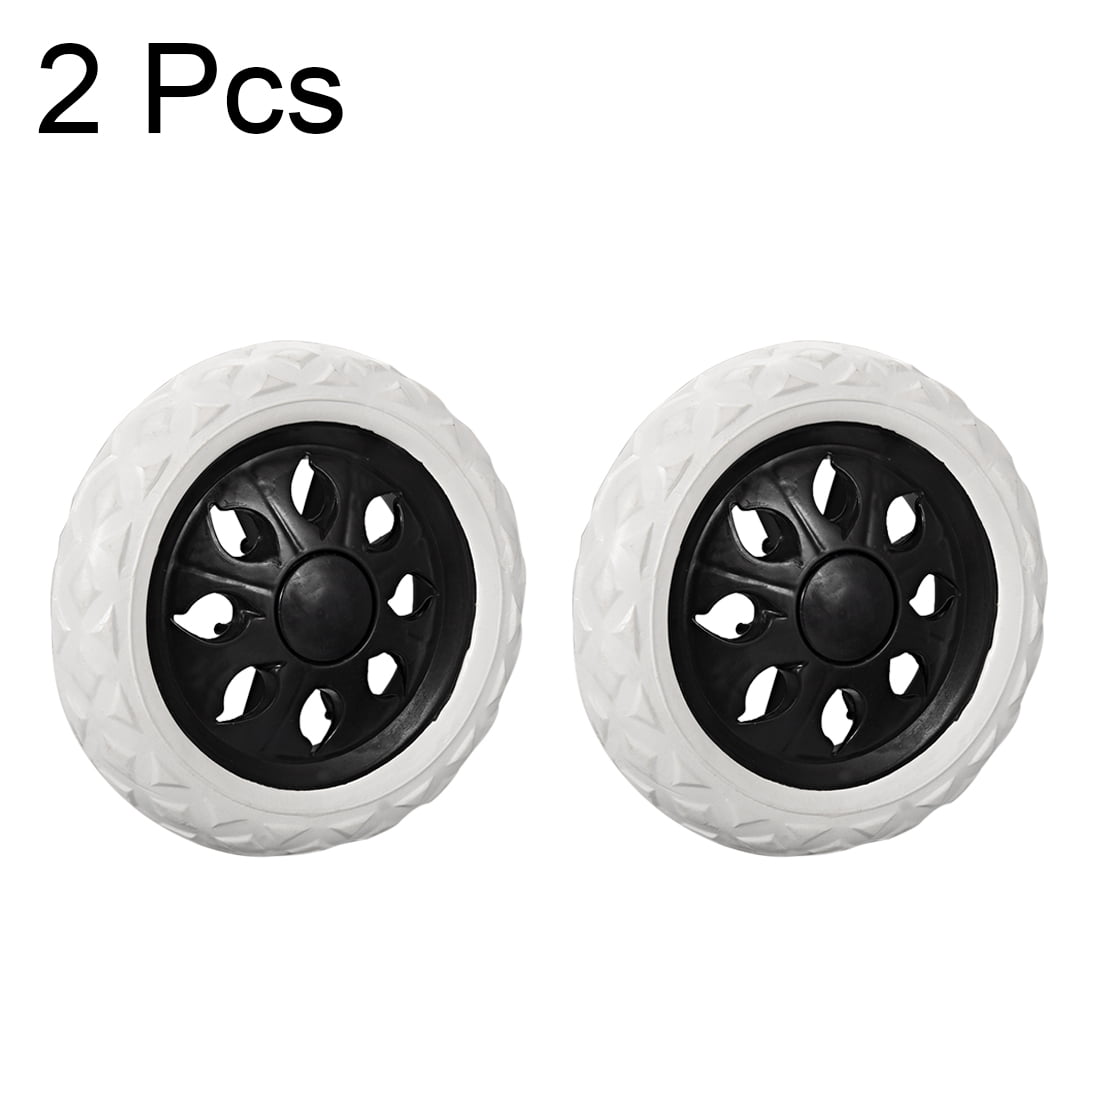 QFDM Alloy Durable Shopping Cart Wheel 2 Pcs Replaceable Shopping Basket Cart 4.4 Wheels Red Black Rubber Plastic Red Black 296g Good Replacement Stainless Steel Pulley 